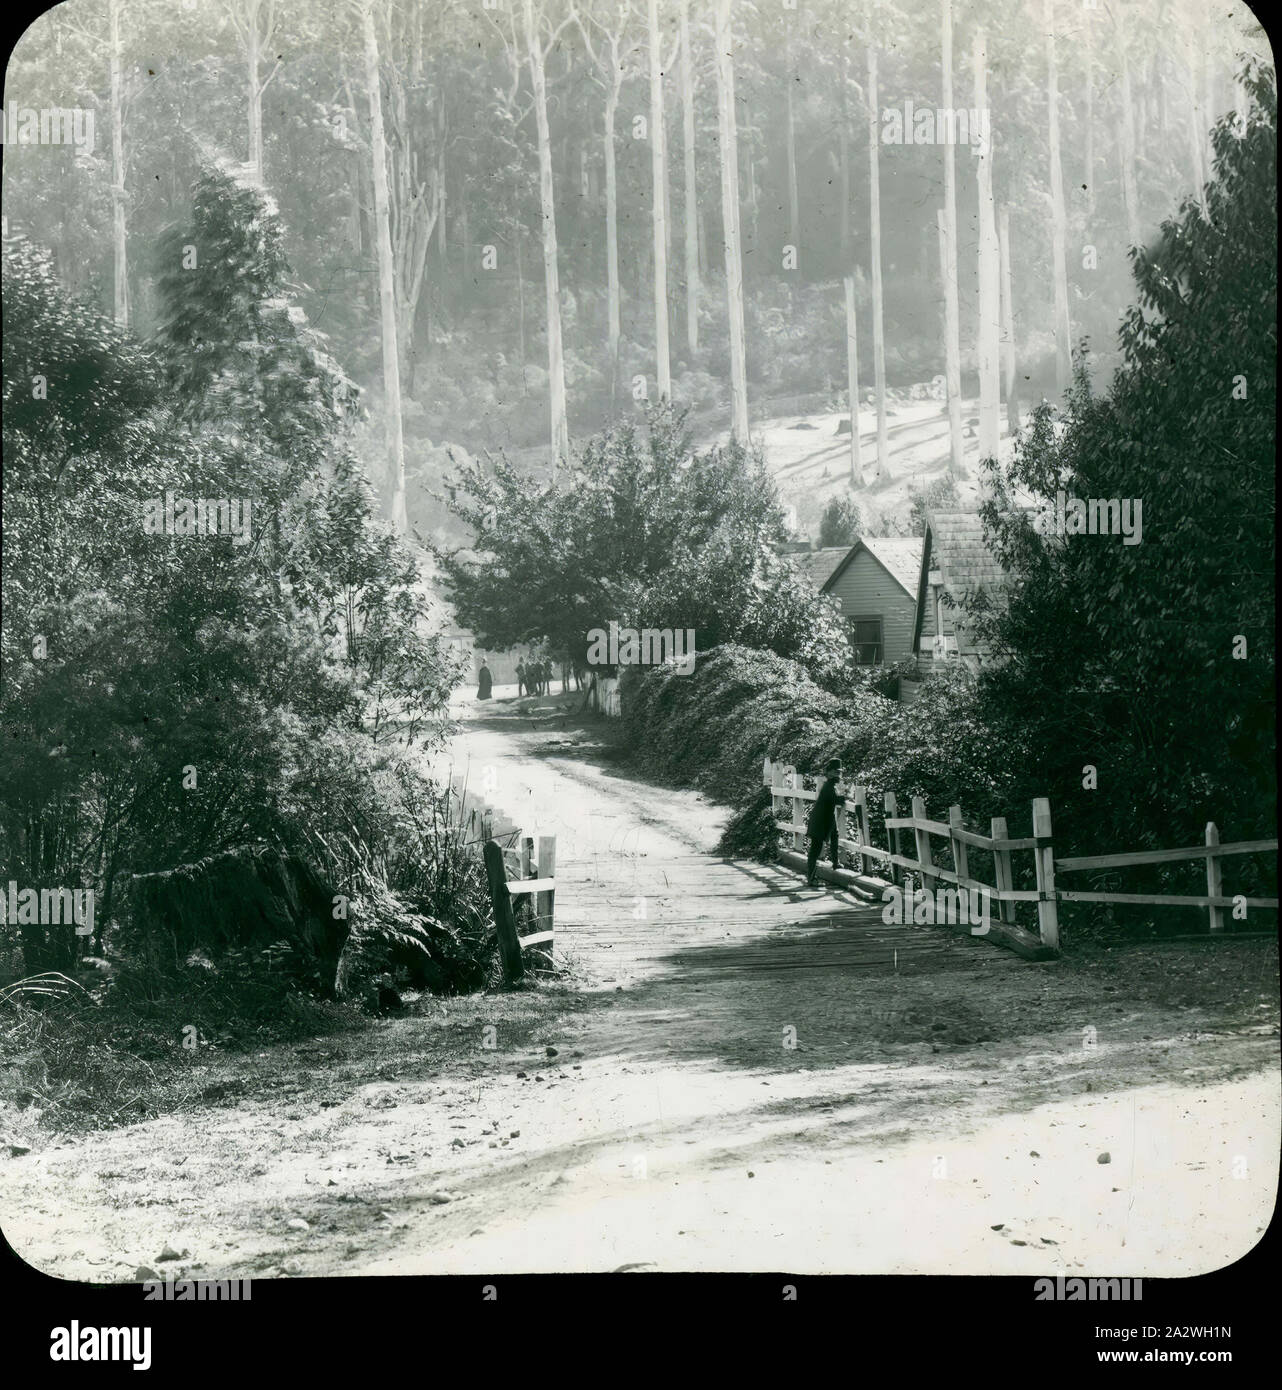 Lantern Slide - Fernshaw Village, Healesville, Victoria, Black and white image of the bridge over Watts River at Fernshaw Village on the Black Spur between Healesville and Narbethong which existed for 26 years in the 1800s, photographed by A.J. Campbell who also included his sketch of this scene in his sketch book. The village has long disappeared, replaced by the popular Fernshaw Picnic Area maintained by Parks Victoria Stock Photo